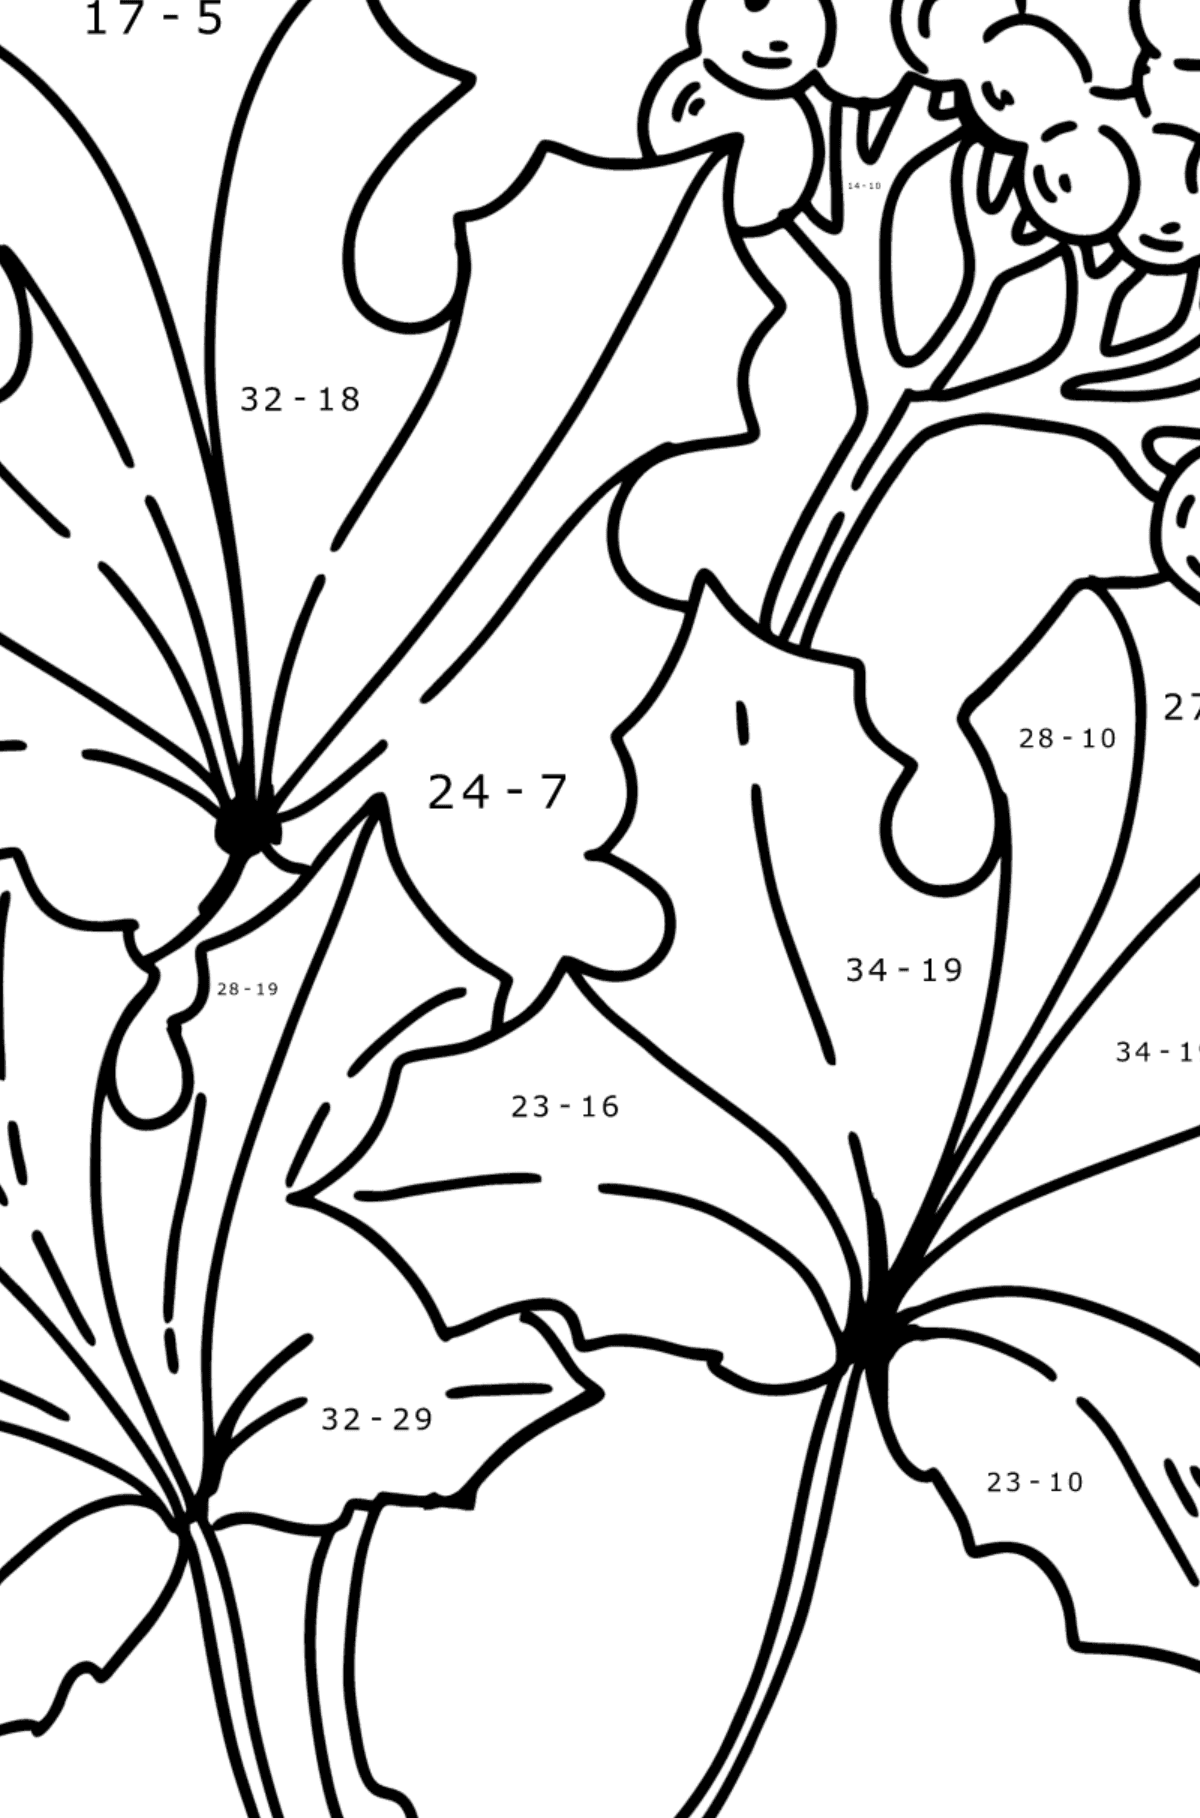 Coloring page - Maple Leaves and Elderberries - Math Coloring - Subtraction for Kids